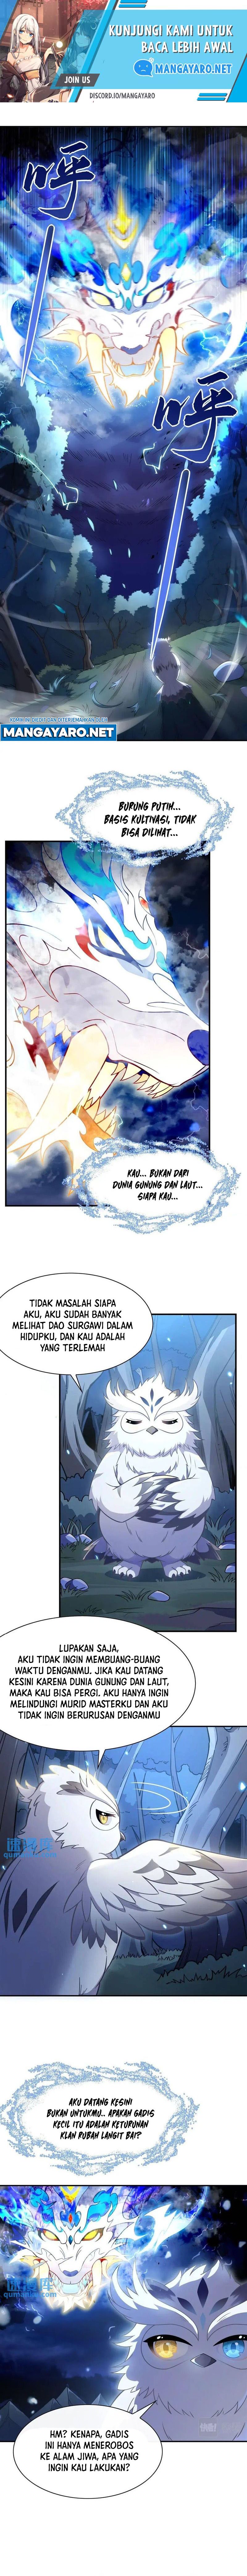 Dilarang COPAS - situs resmi www.mangacanblog.com - Komik my female apprentices are all big shots from the future 198 - chapter 198 199 Indonesia my female apprentices are all big shots from the future 198 - chapter 198 Terbaru 1|Baca Manga Komik Indonesia|Mangacan